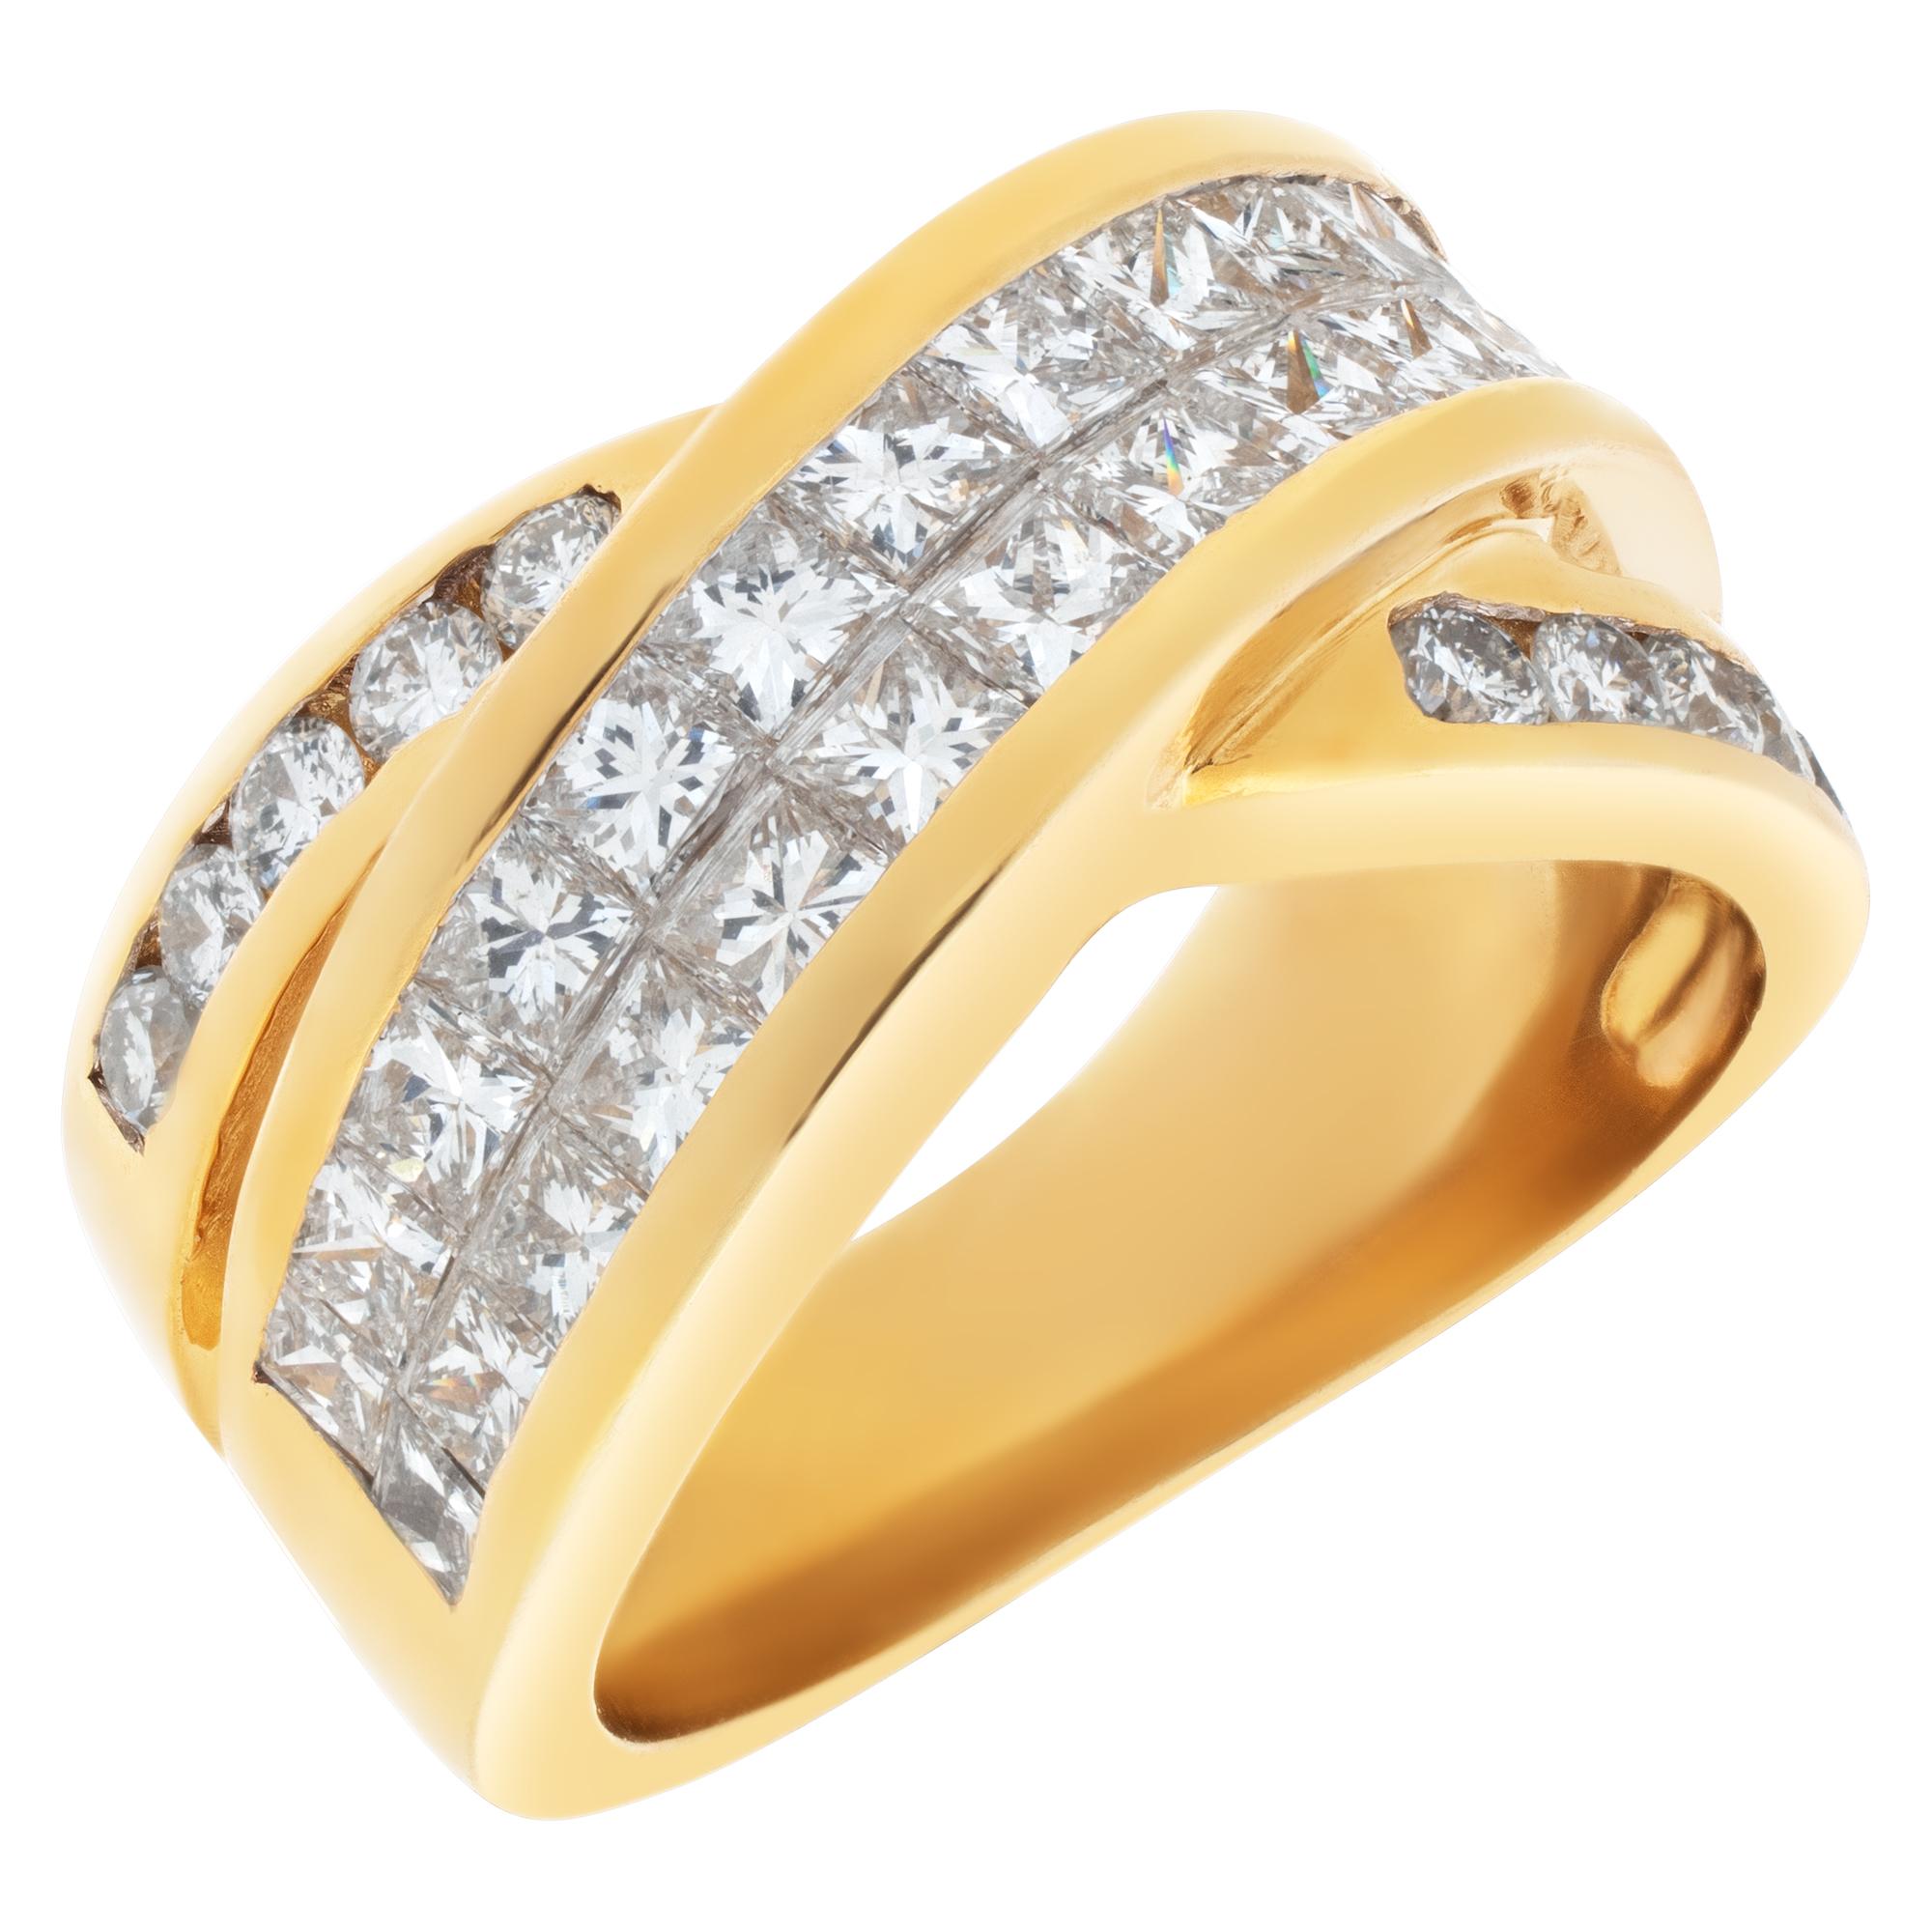 18k Yellow Gold Criss Cross Diamond Ring with over 3 Carats In Excellent Condition For Sale In Surfside, FL